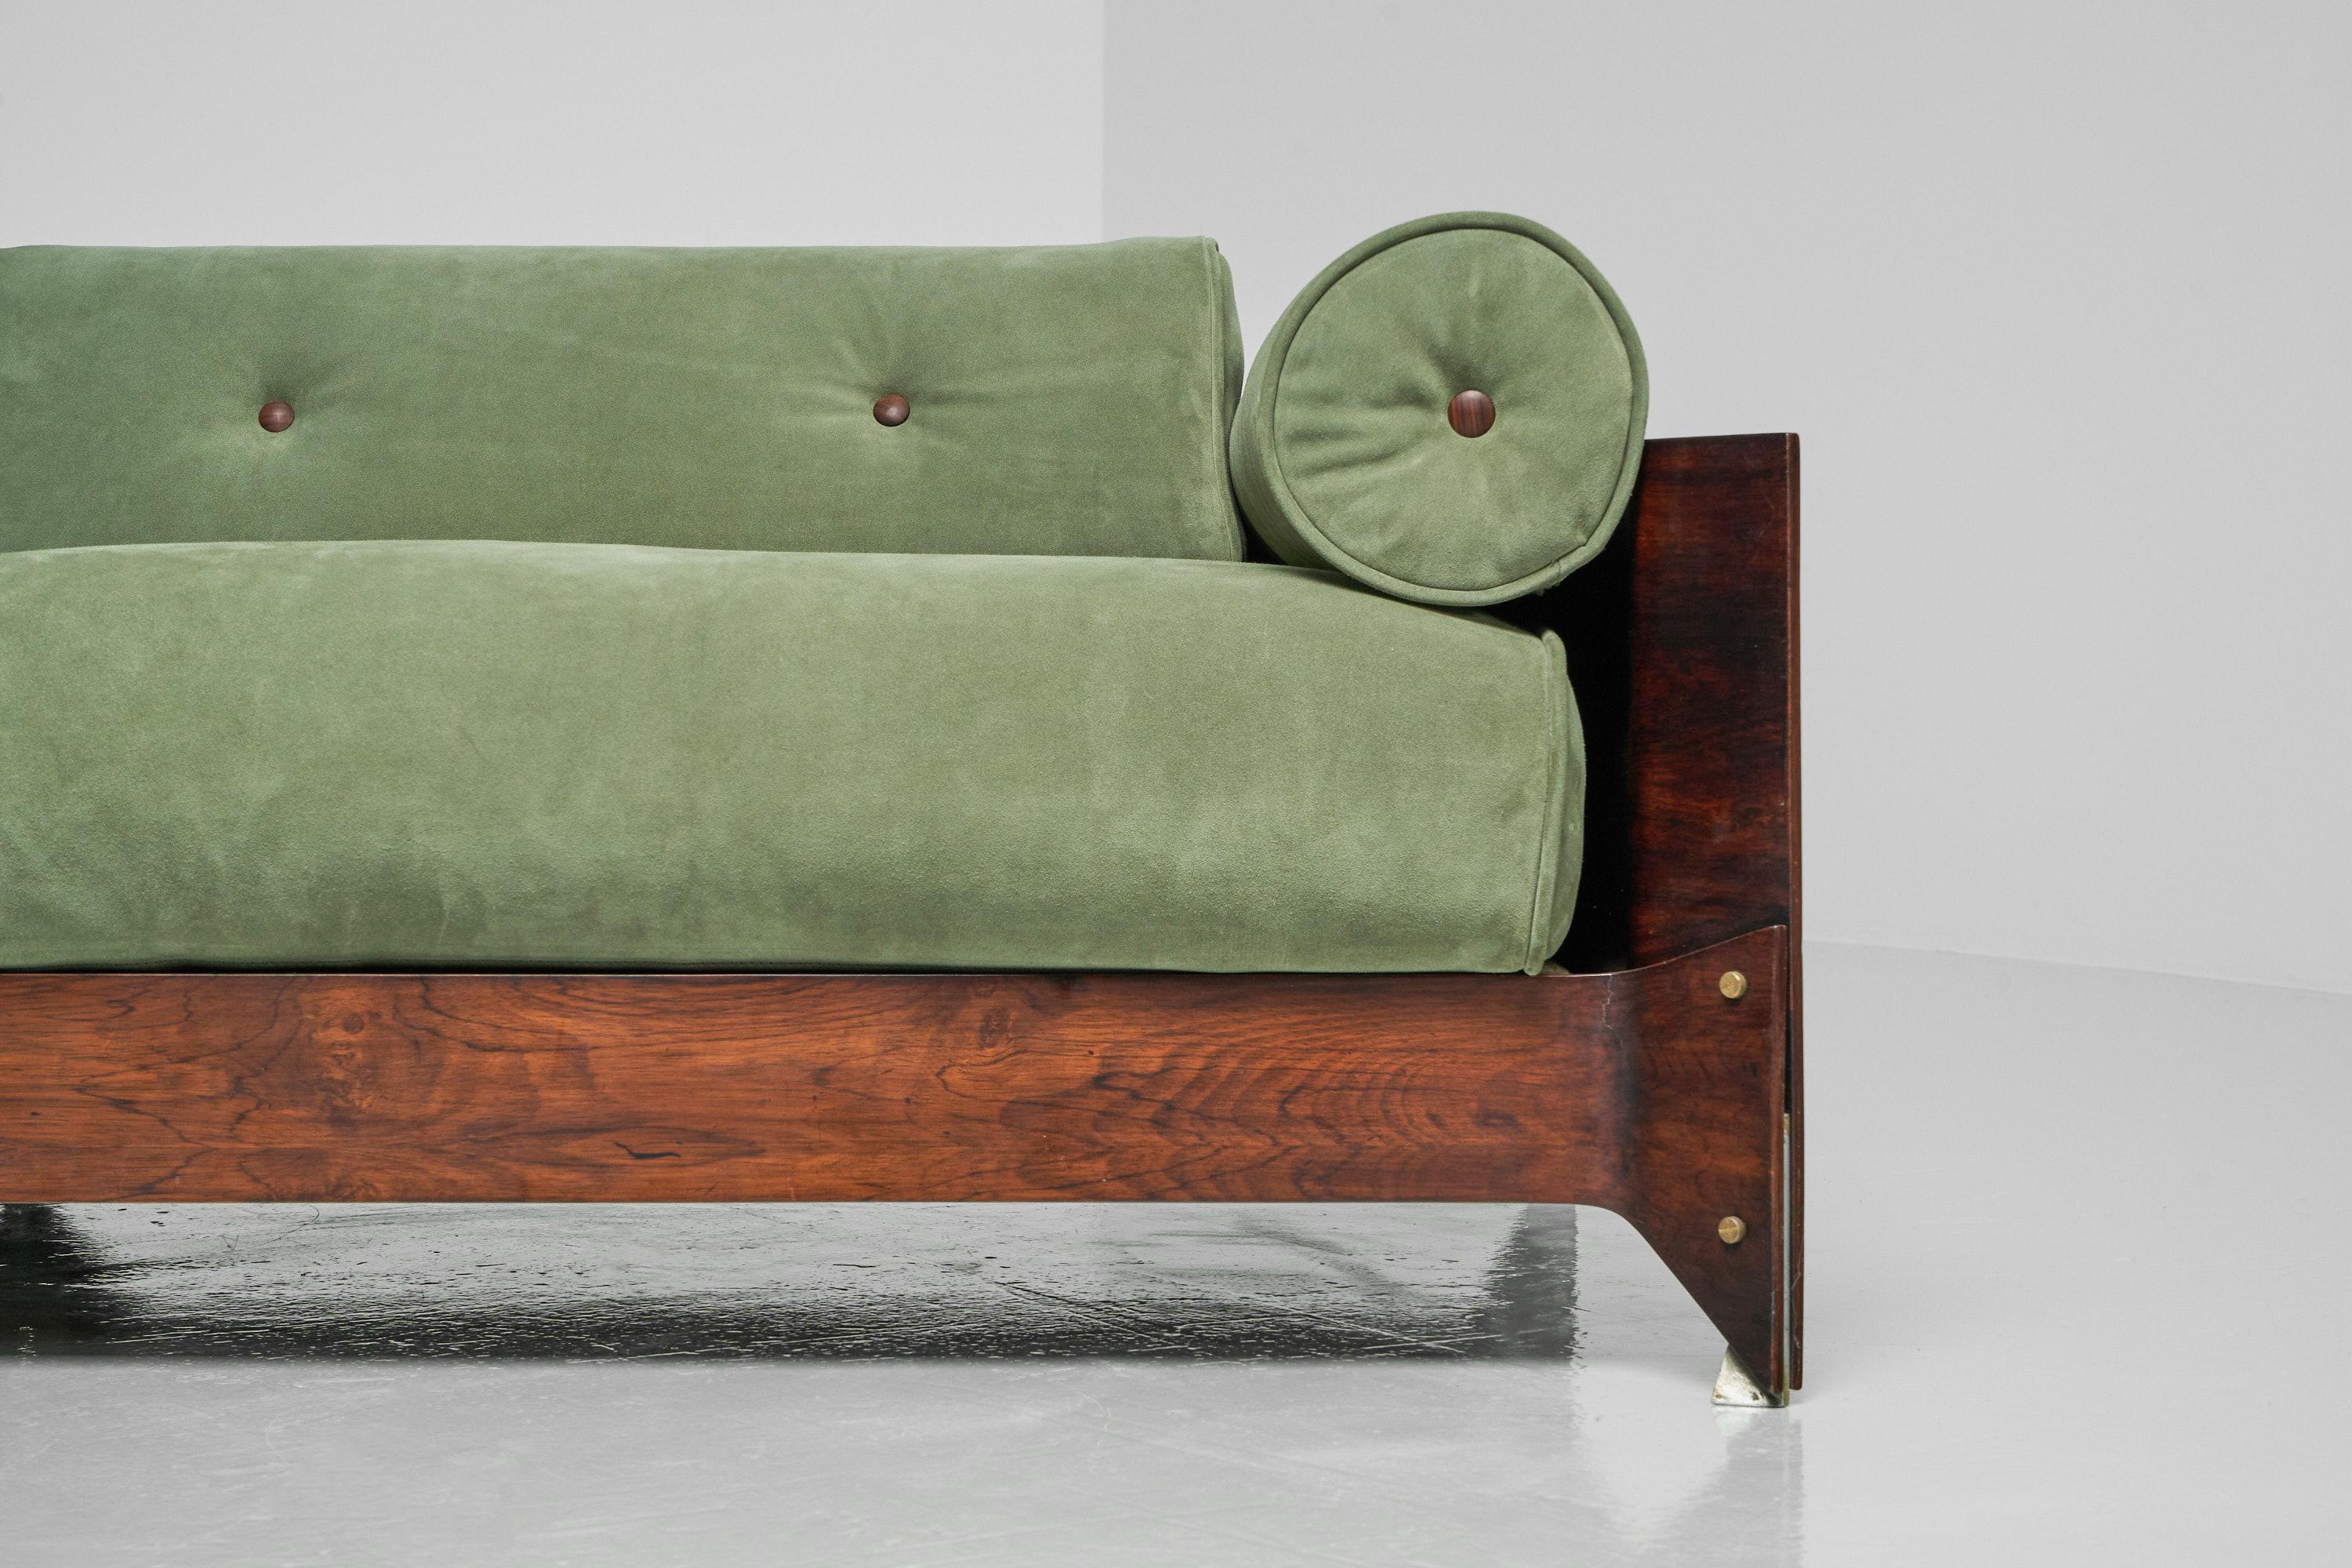 A beautiful and sophisticated so called ‘Brasiliana’ sofa designed by Jorge Zalszupin and manufactured by his own company L’Atelier, Brazil 1959. With its thin frame and large cushions, the Sofá e Poltrona Brasiliana or Brasiliana sofa has a very